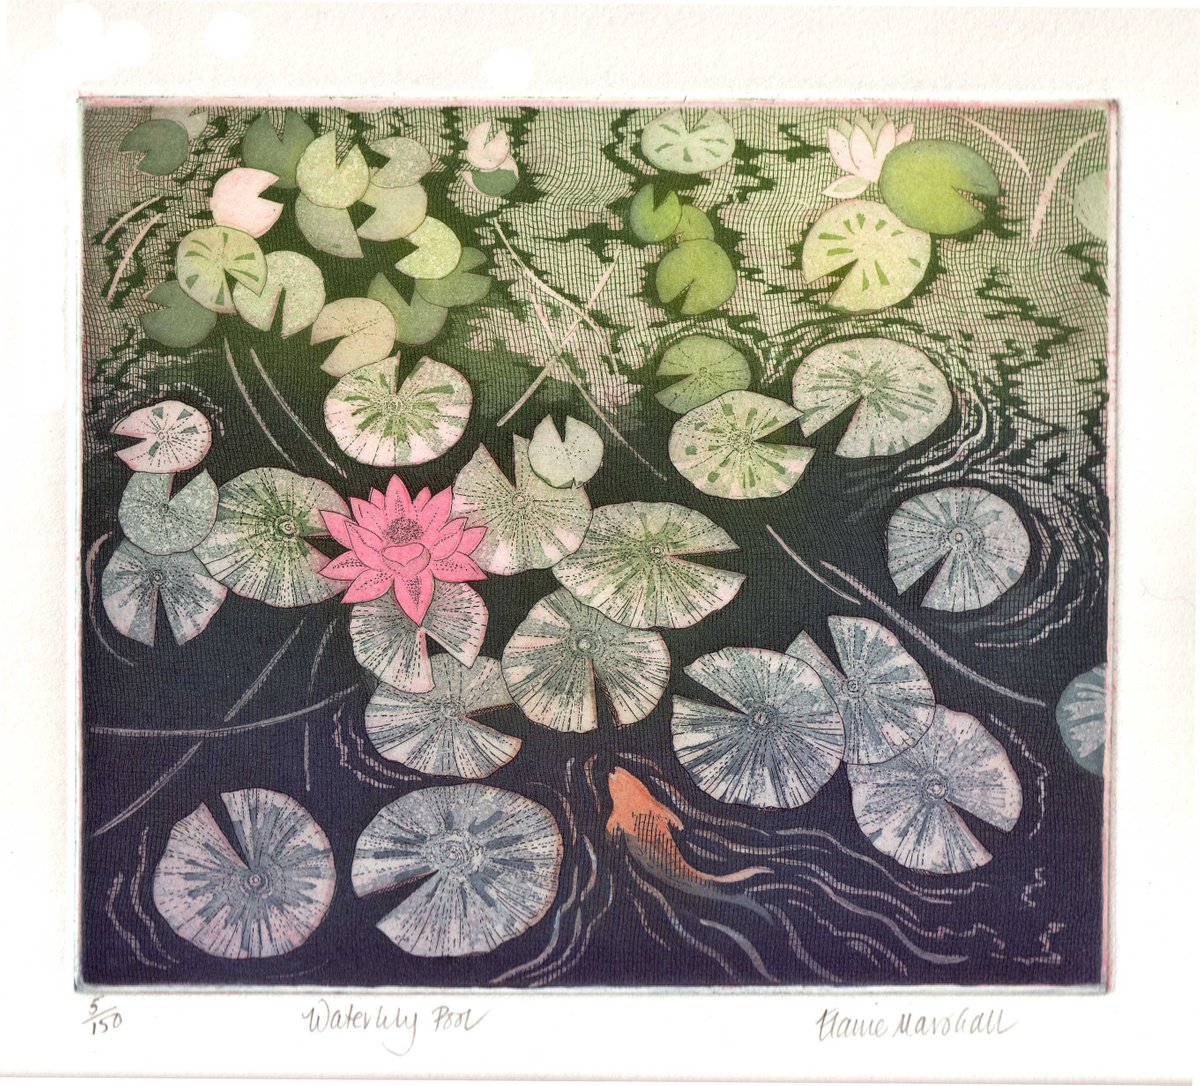 Waterlily pool by Elaine Marshall